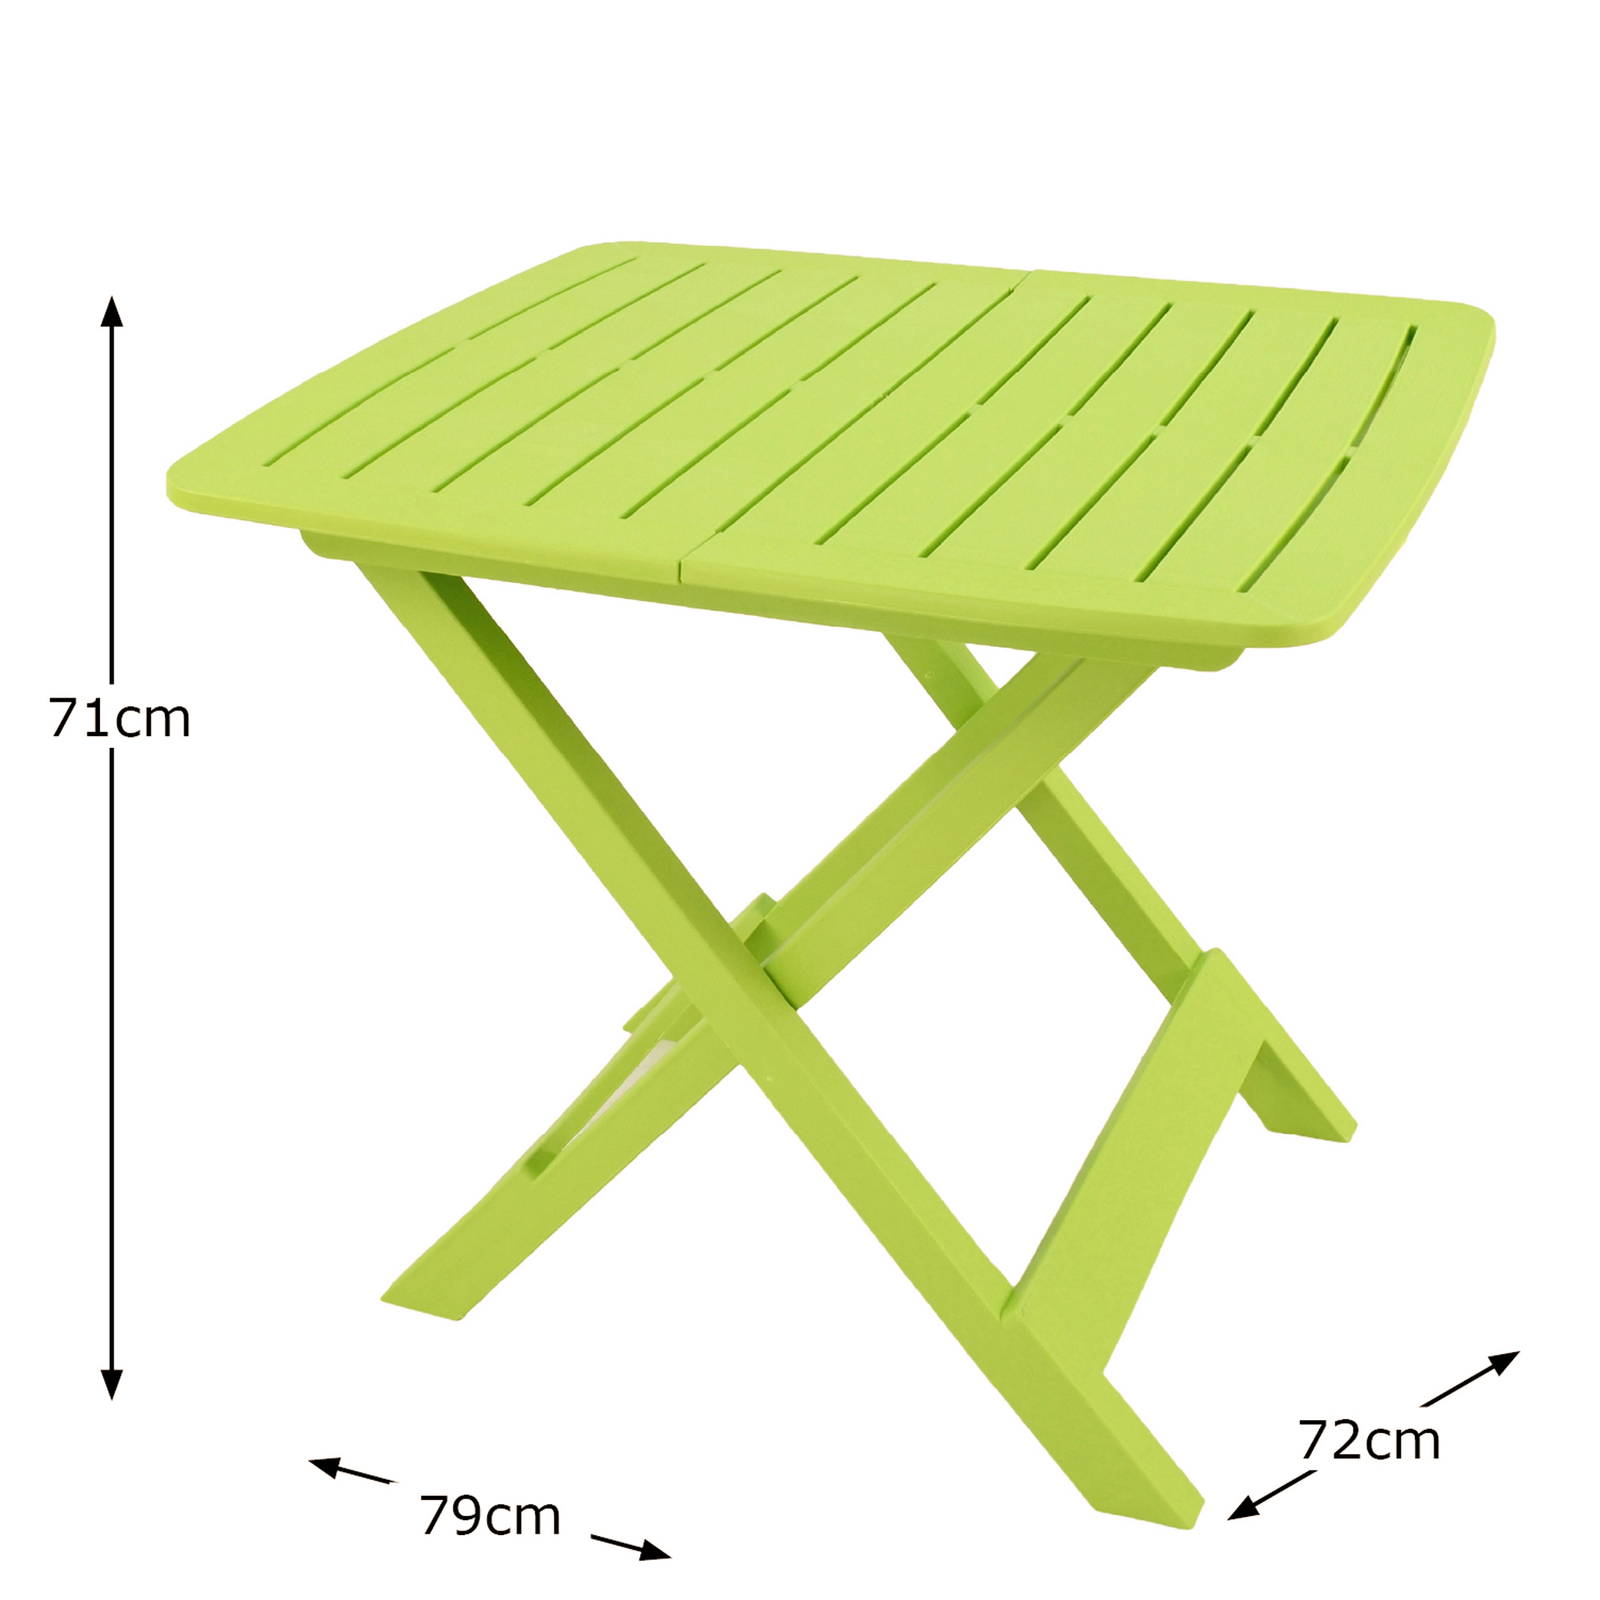 Trabella Brescia Folding Table in Lime Green Tables Trabella Default Title  